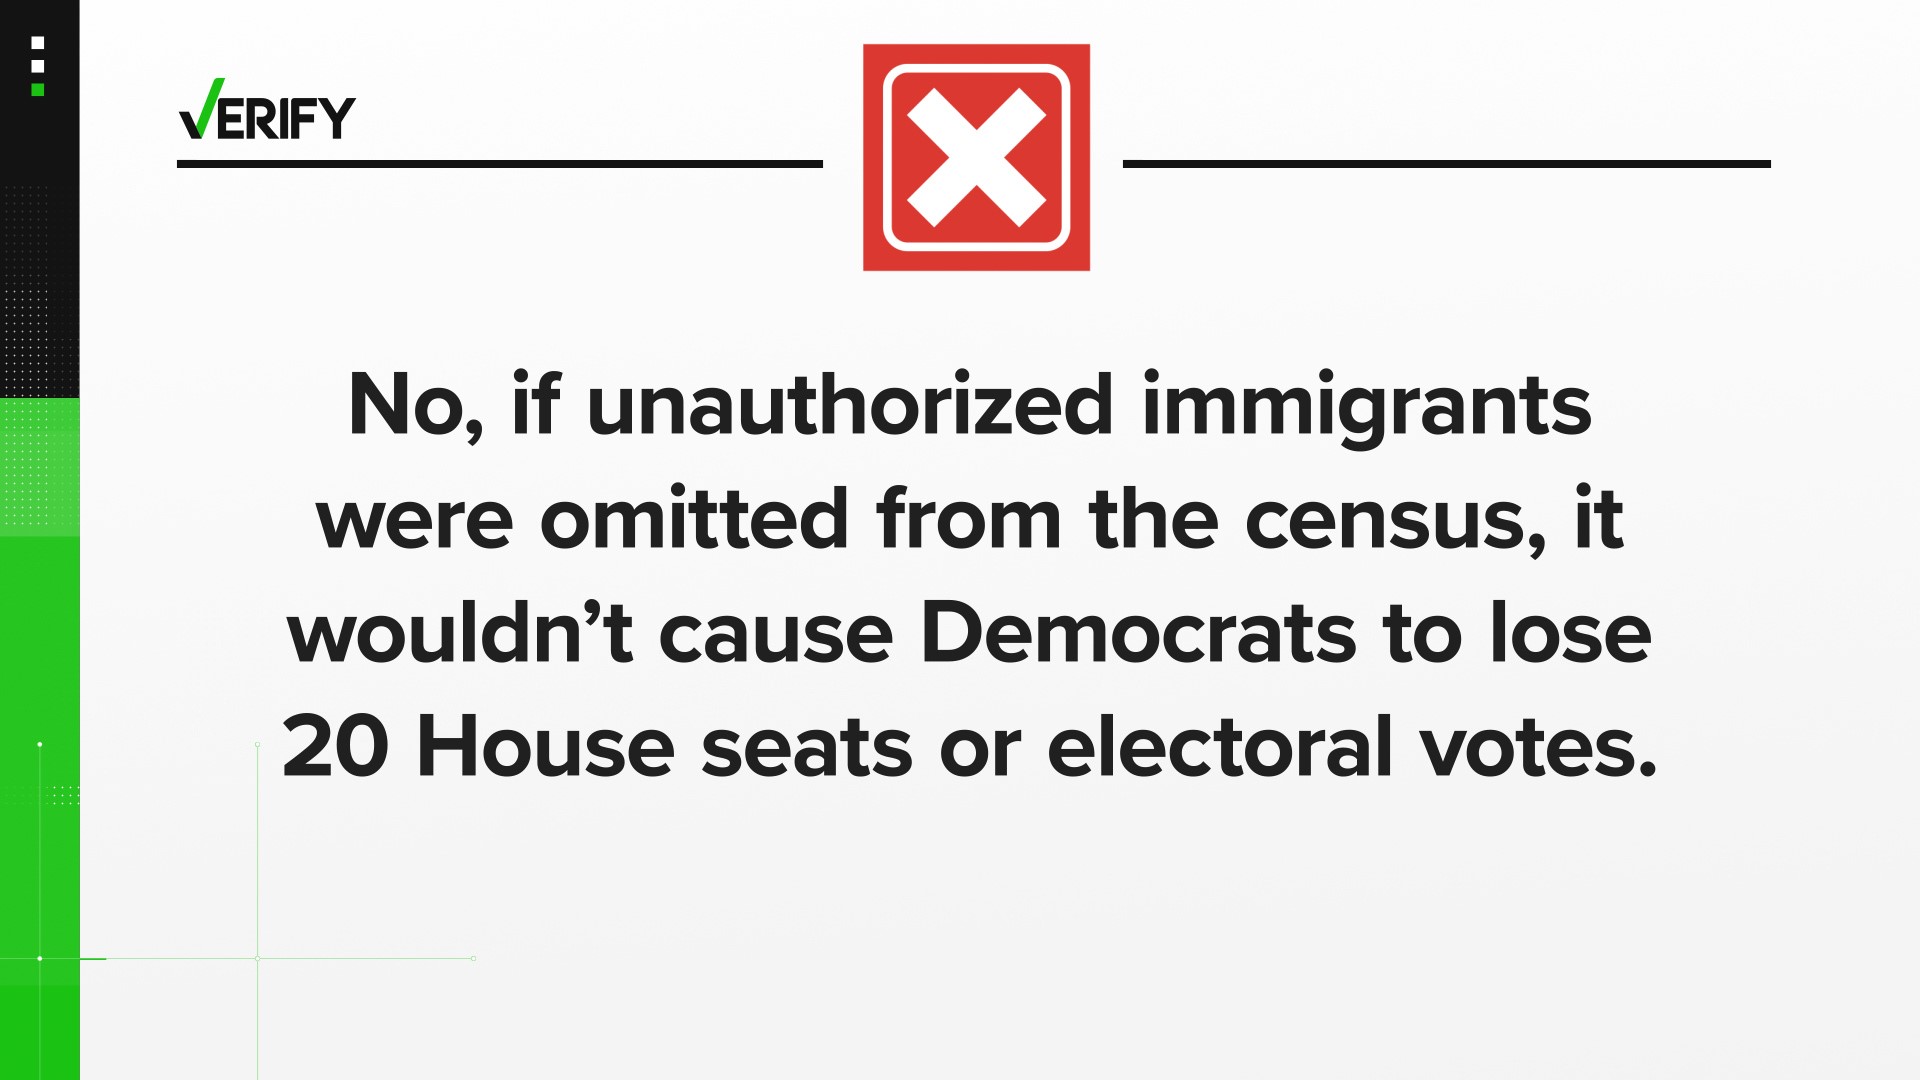 House seats are based on census population data that includes noncitizens. Omitting people in the U.S. illegally wouldn’t significantly change seats or electoral vot